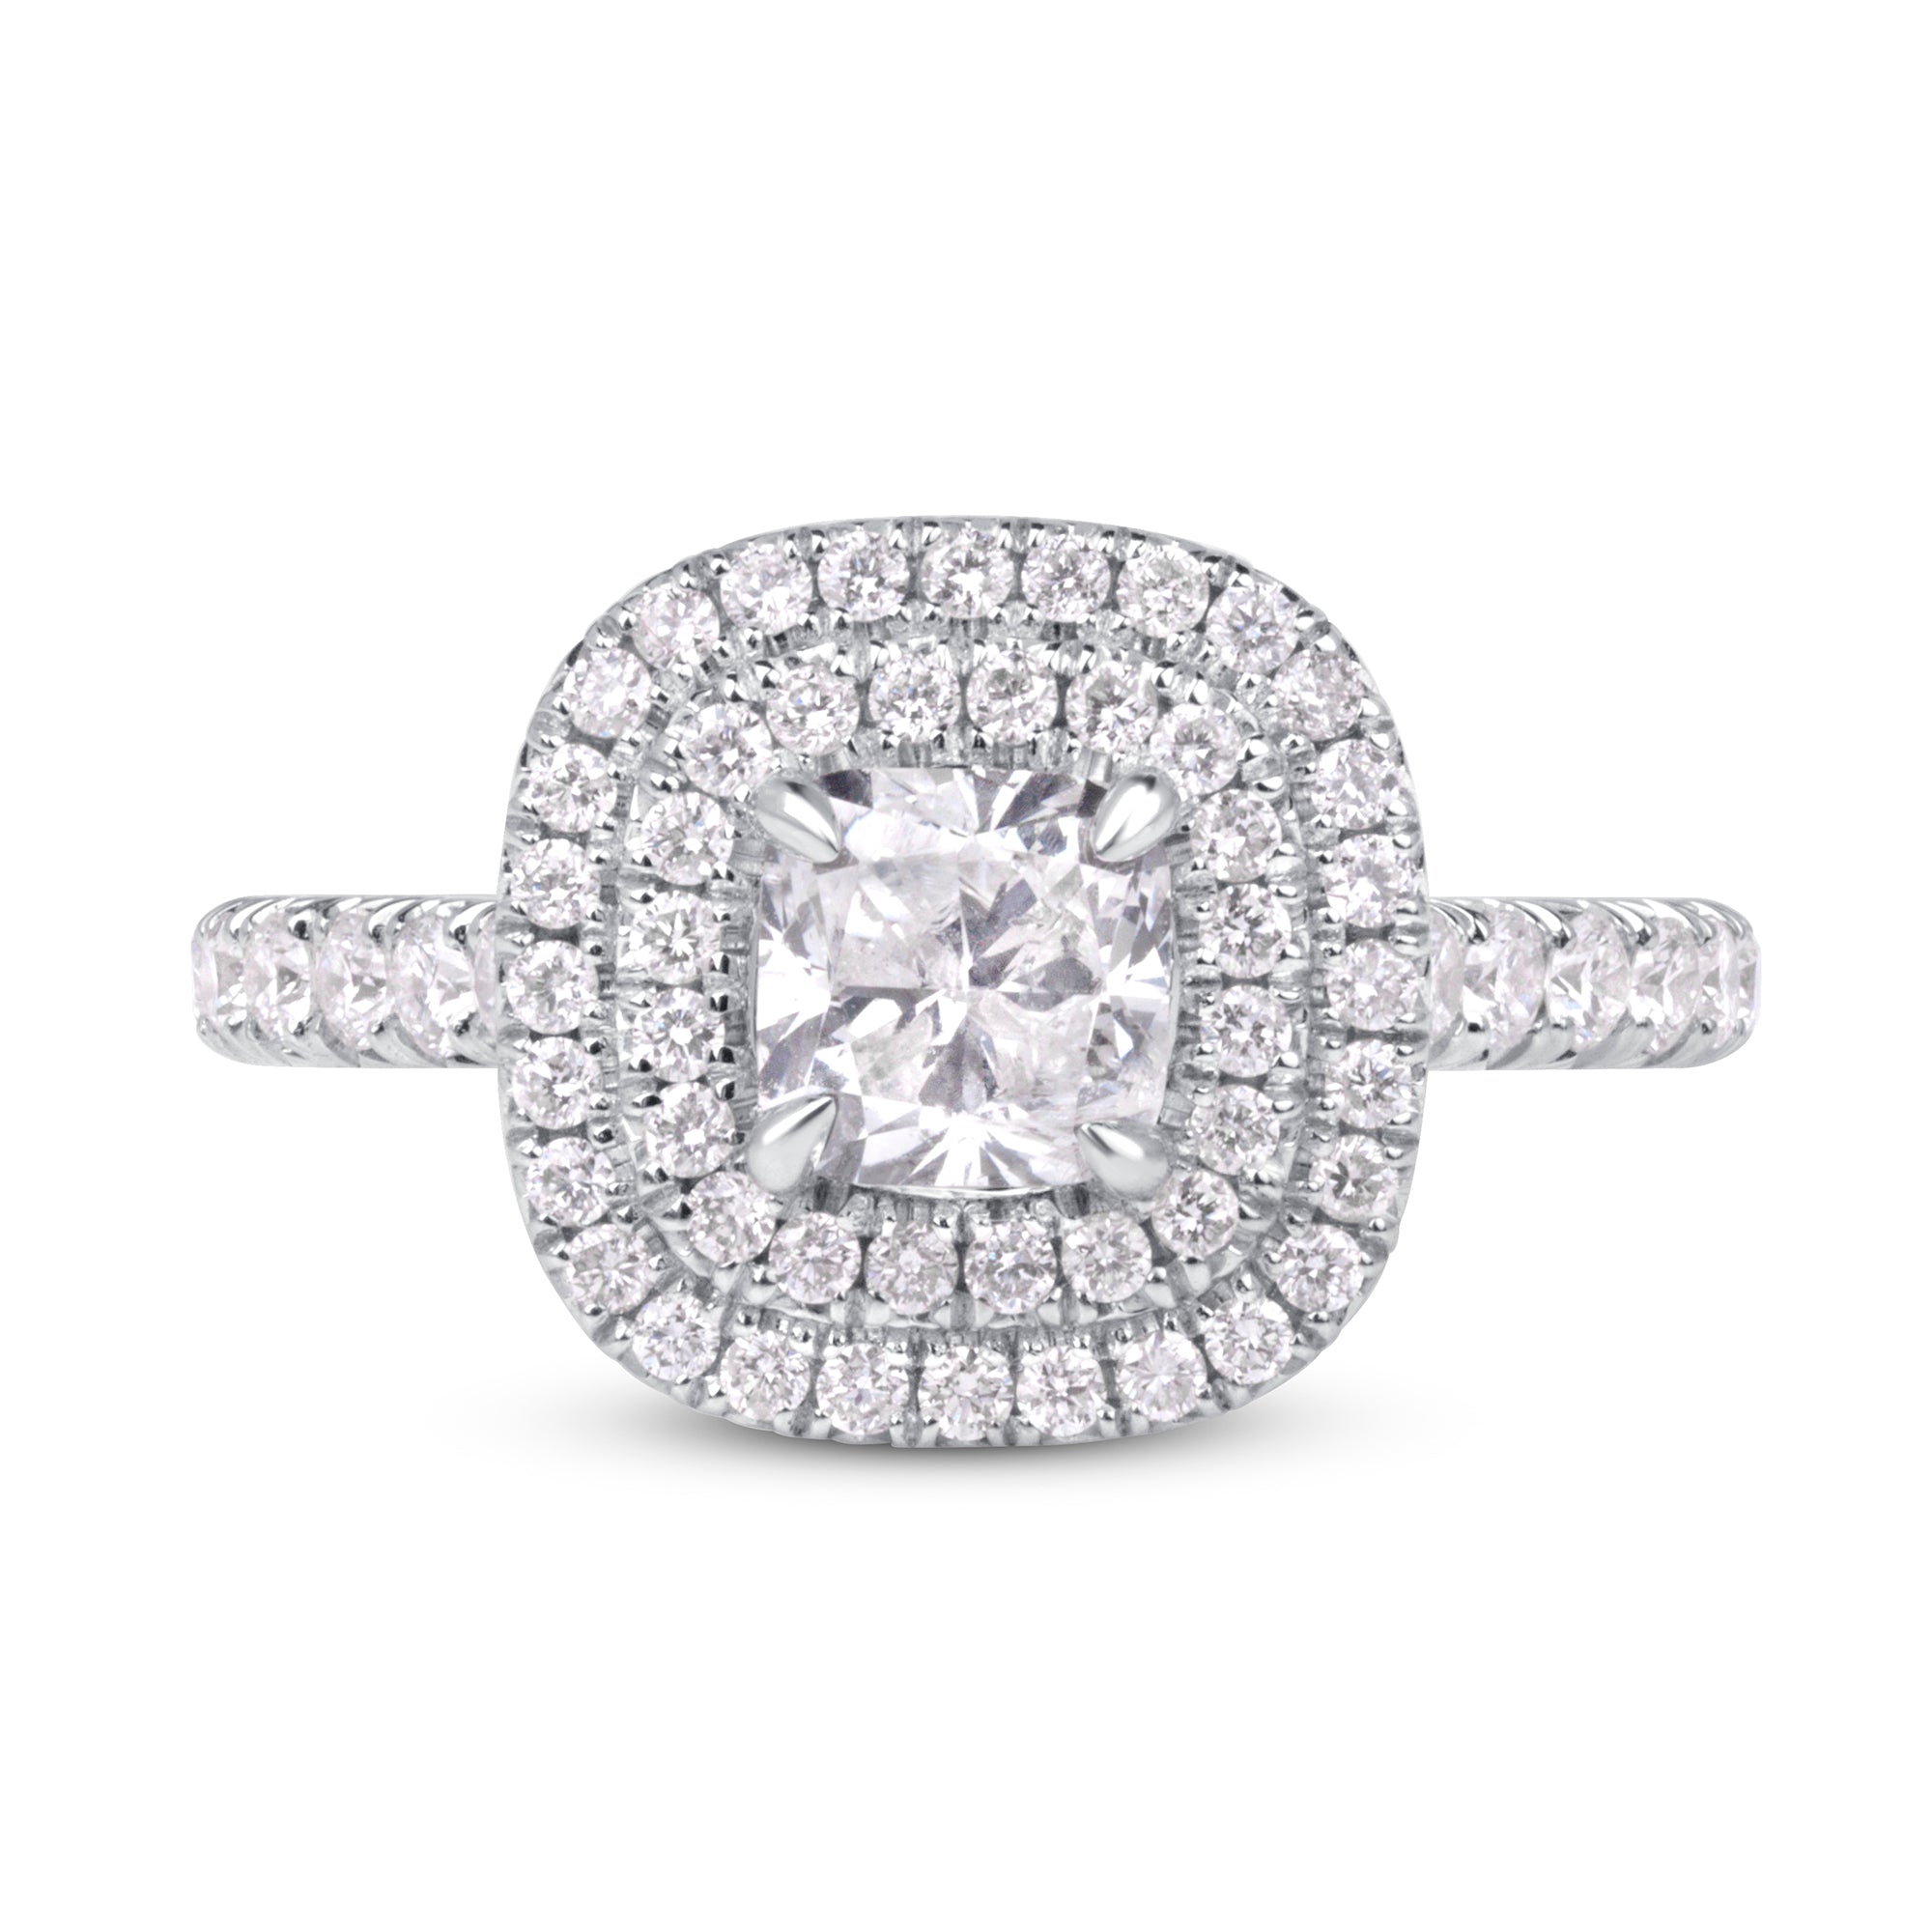 1.76ctw Cushion Cut Double Halo Diamond Cluster Ring in 14K White Gold